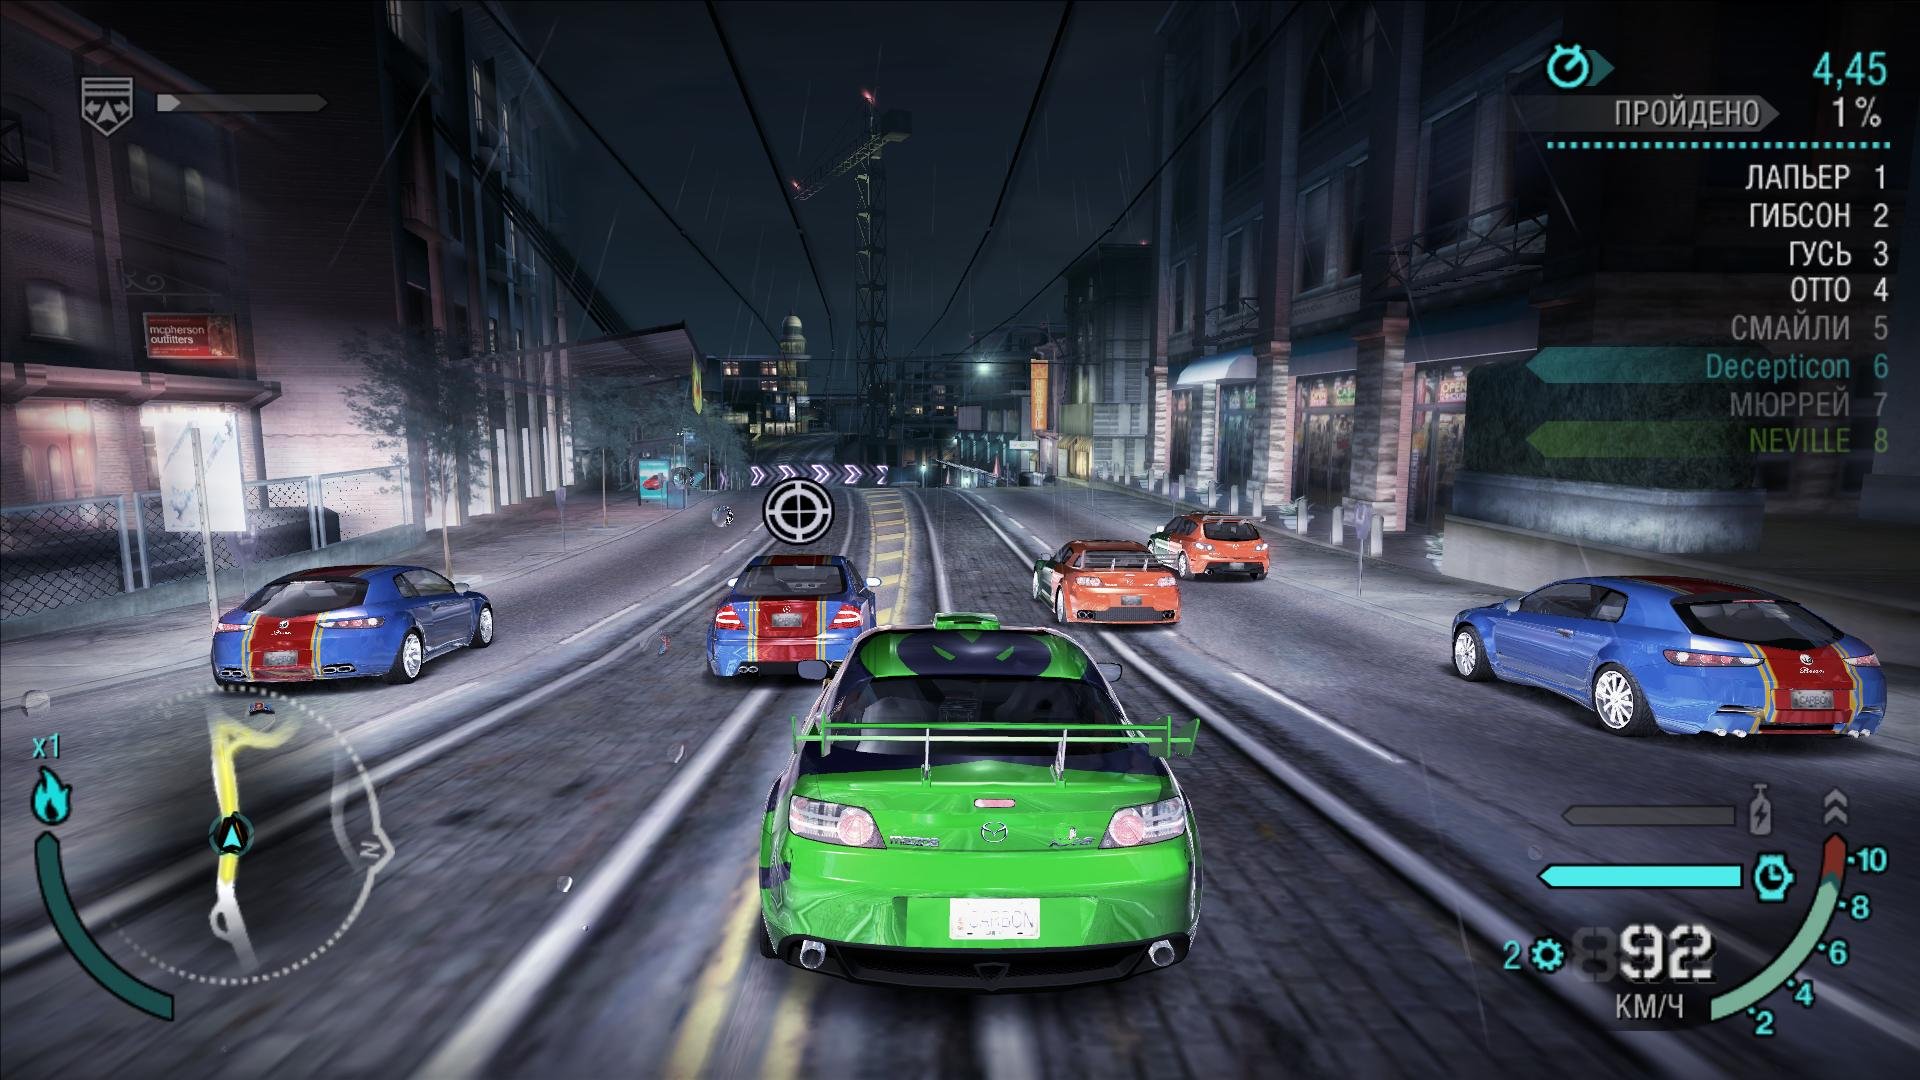 Скриншот 2 к игре Need for Speed: Carbon - Collector's Edition (2006) PC | RePack от Decepticon